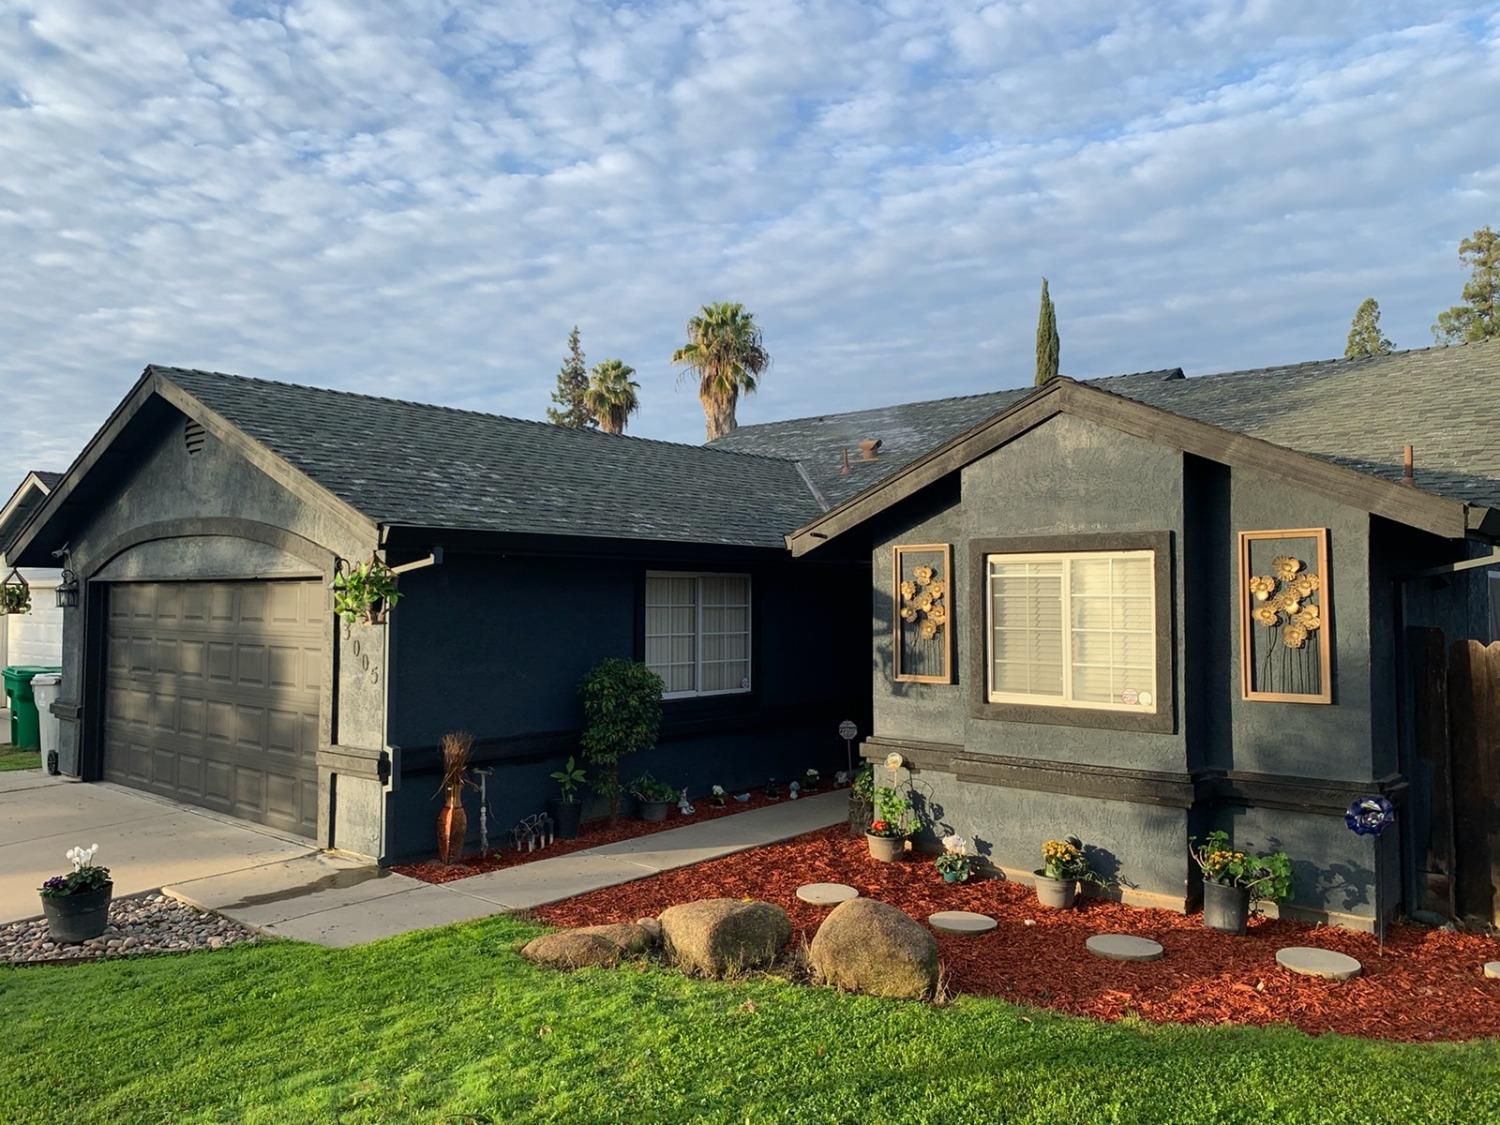 Photo of 3005 Laura Ln in Atwater, CA